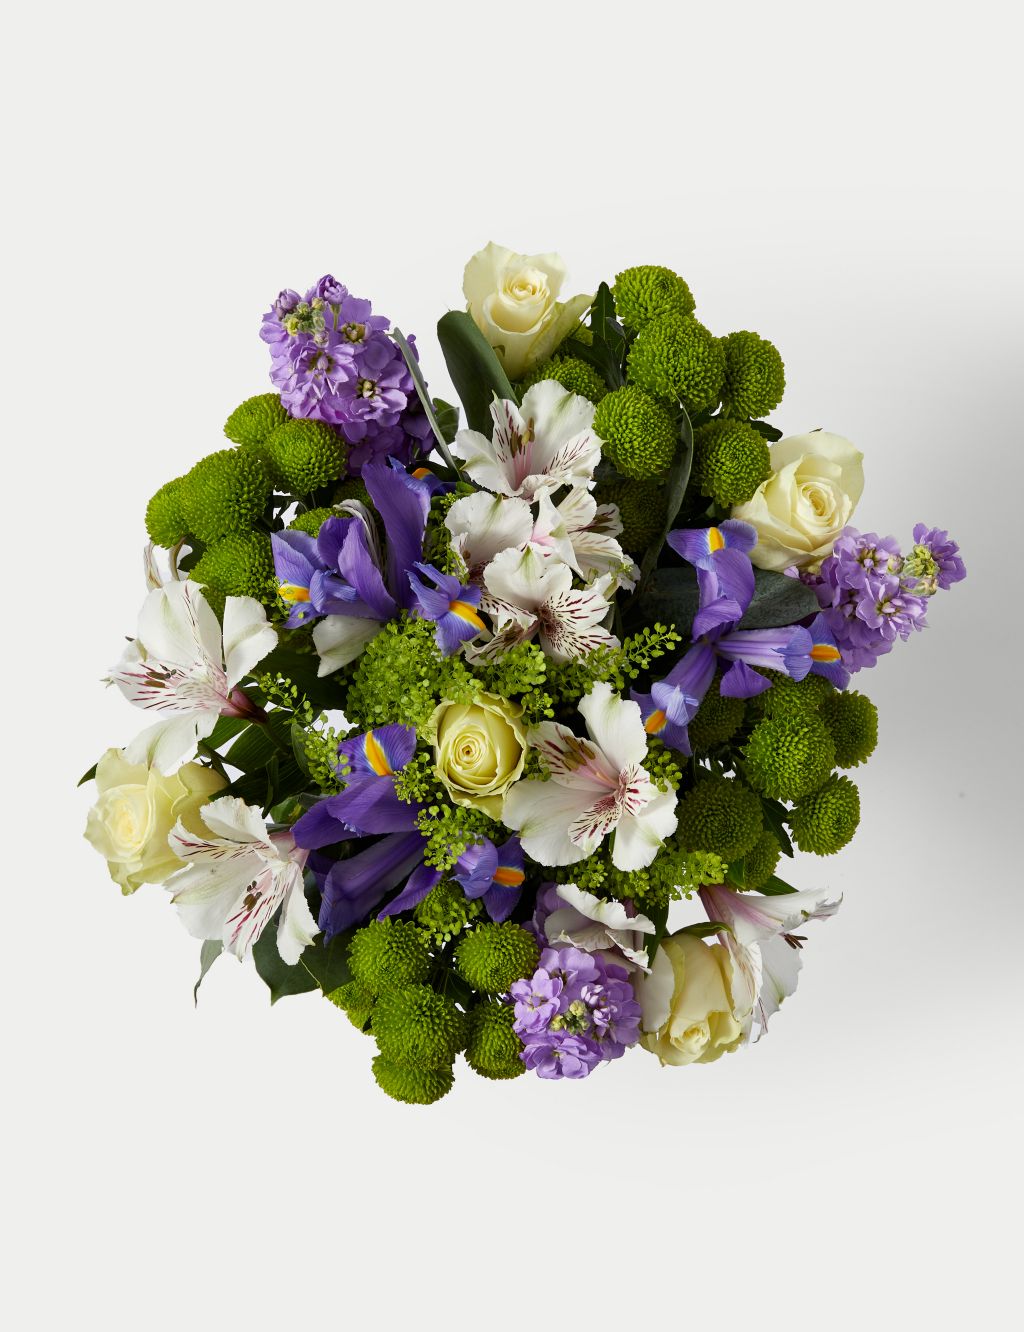 Sending Love Bouquet - 10% Donation To Macmillan Cancer Support